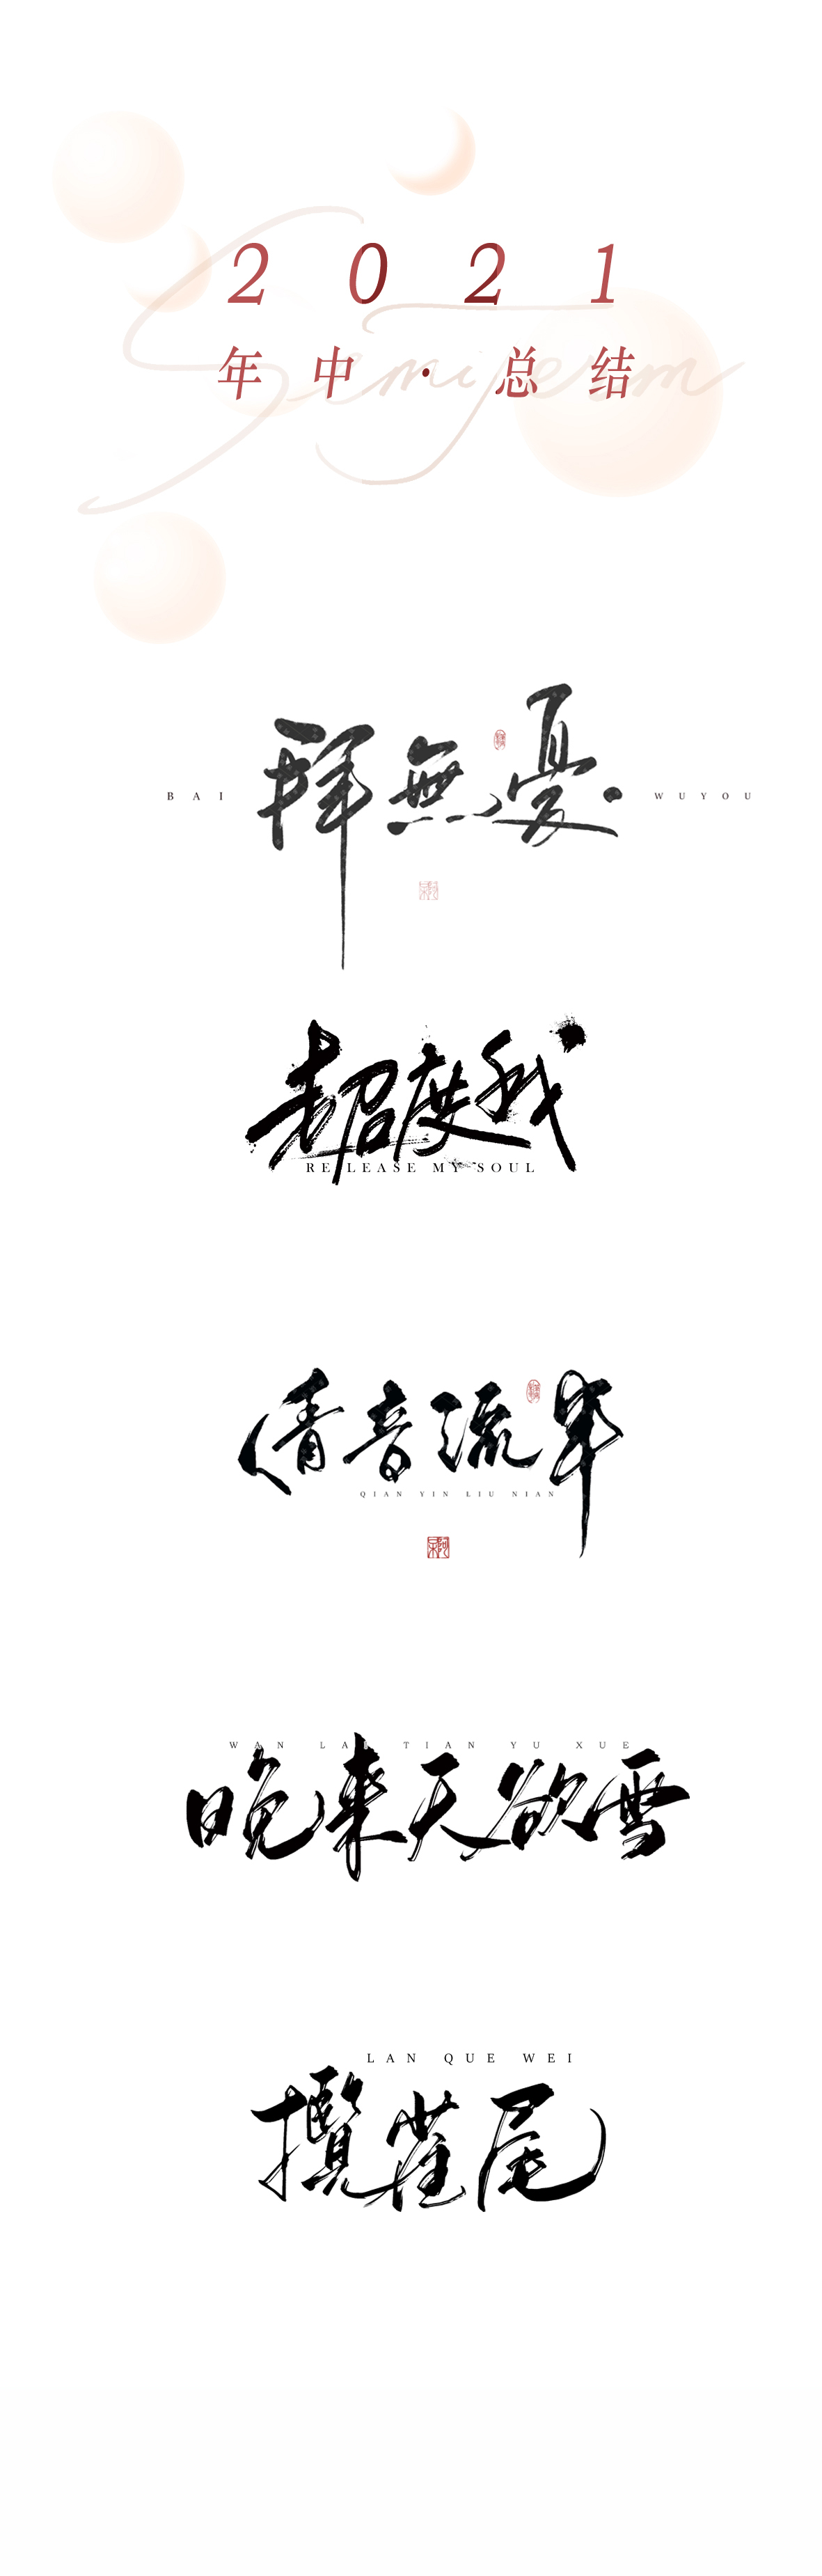 9P Collection of the latest Chinese font design schemes in 2021 #.280